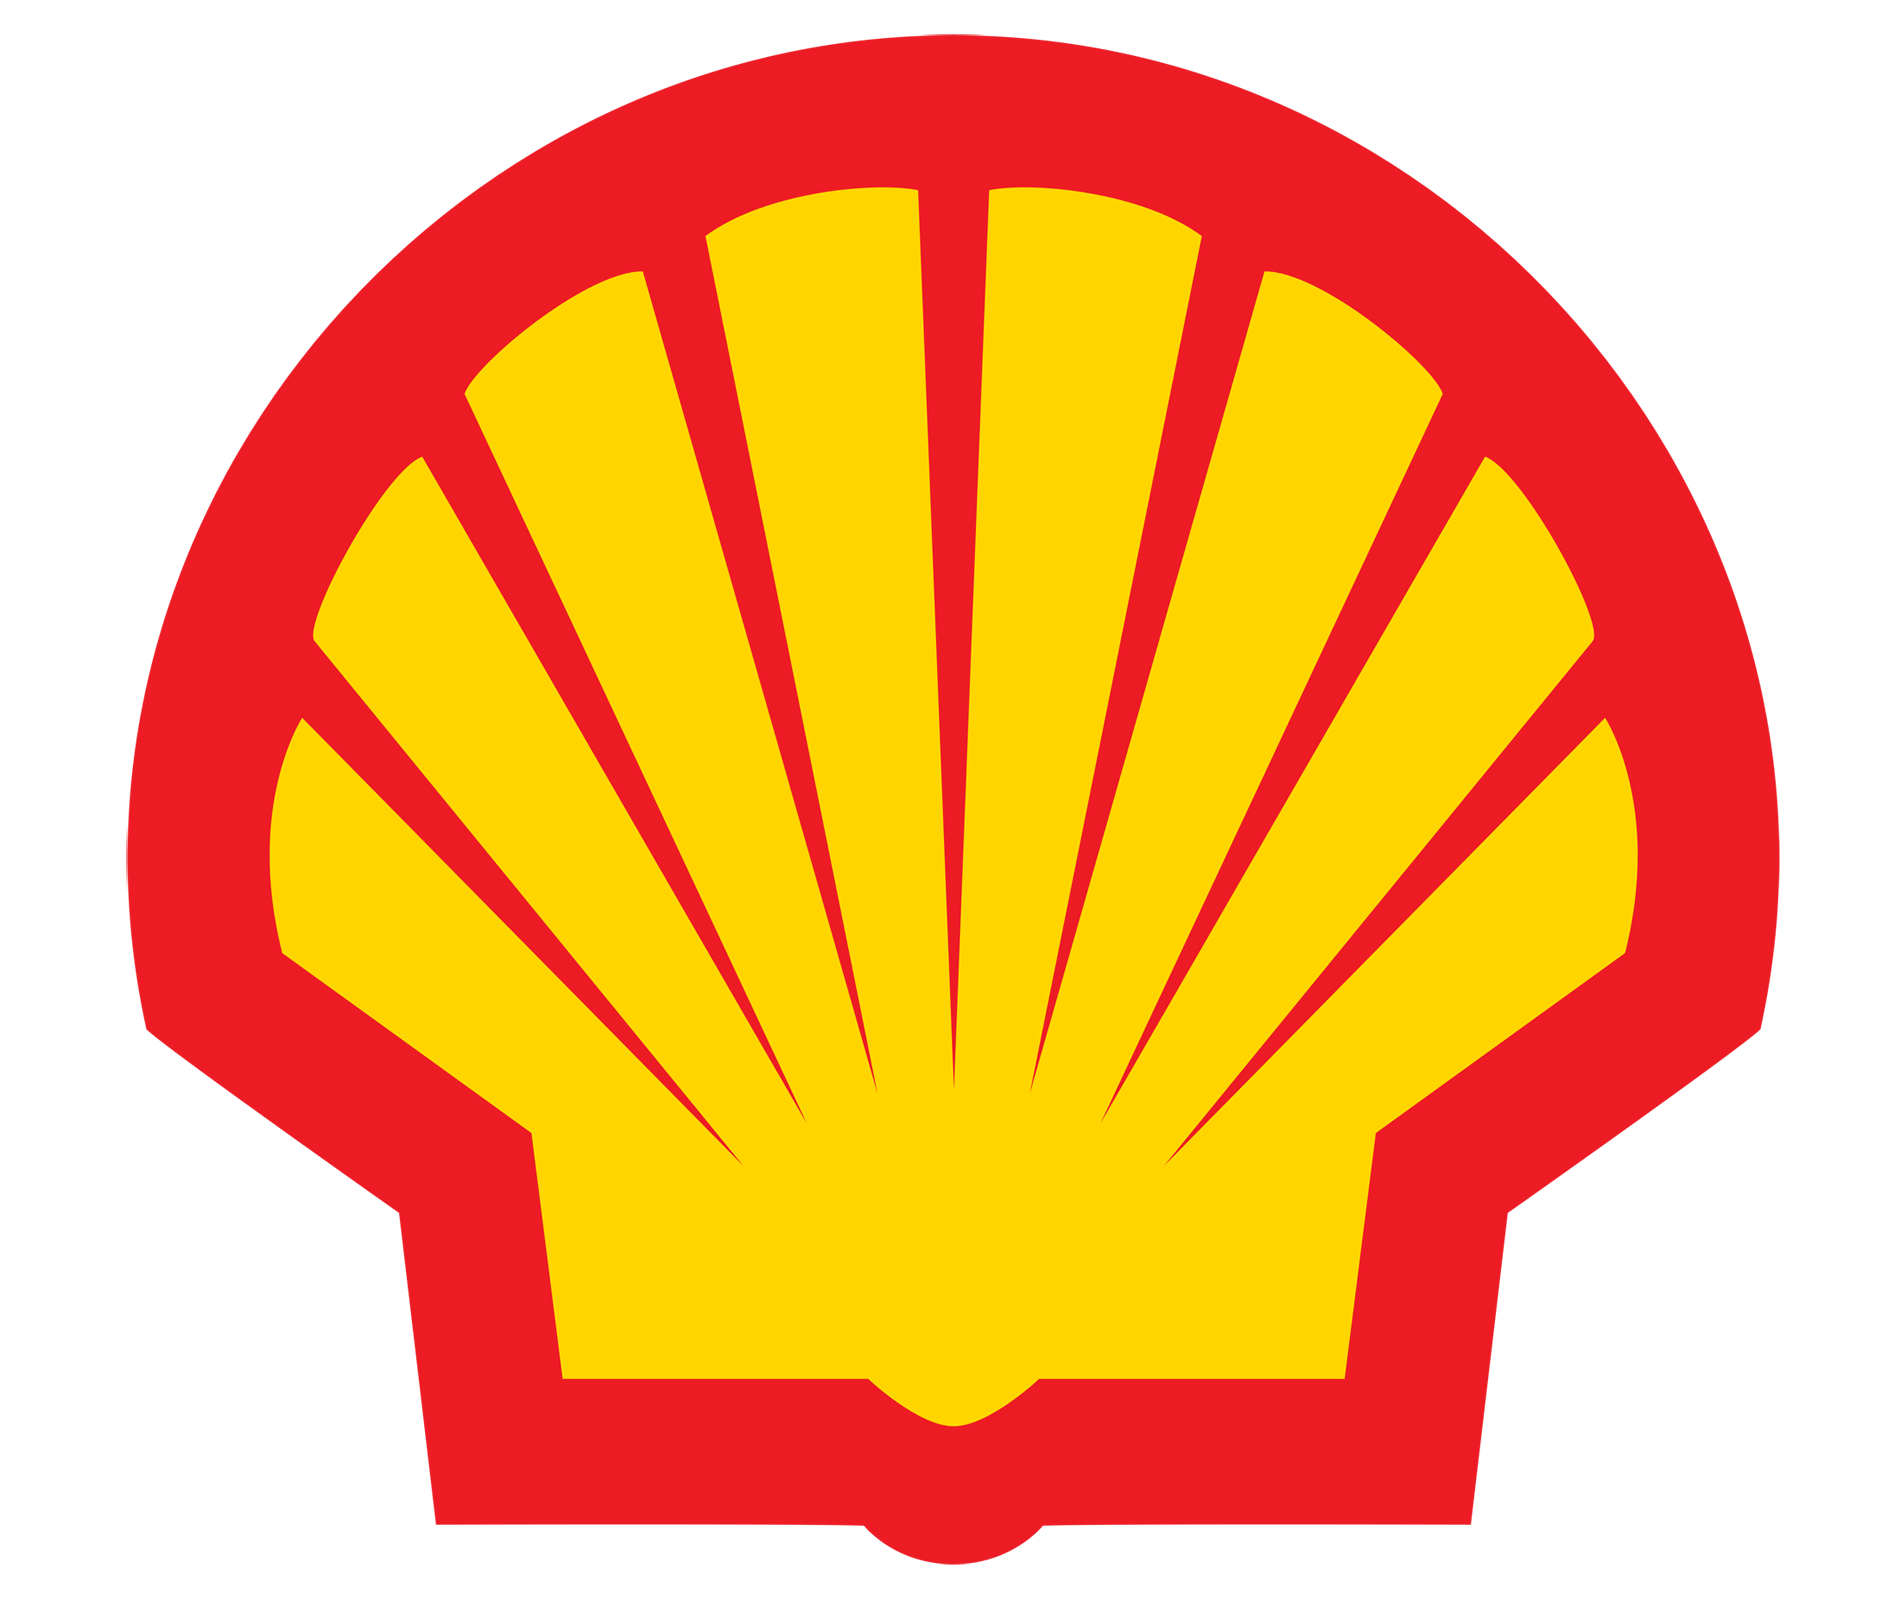  Shell Logo Shell Symbol Meaning History And Evolution